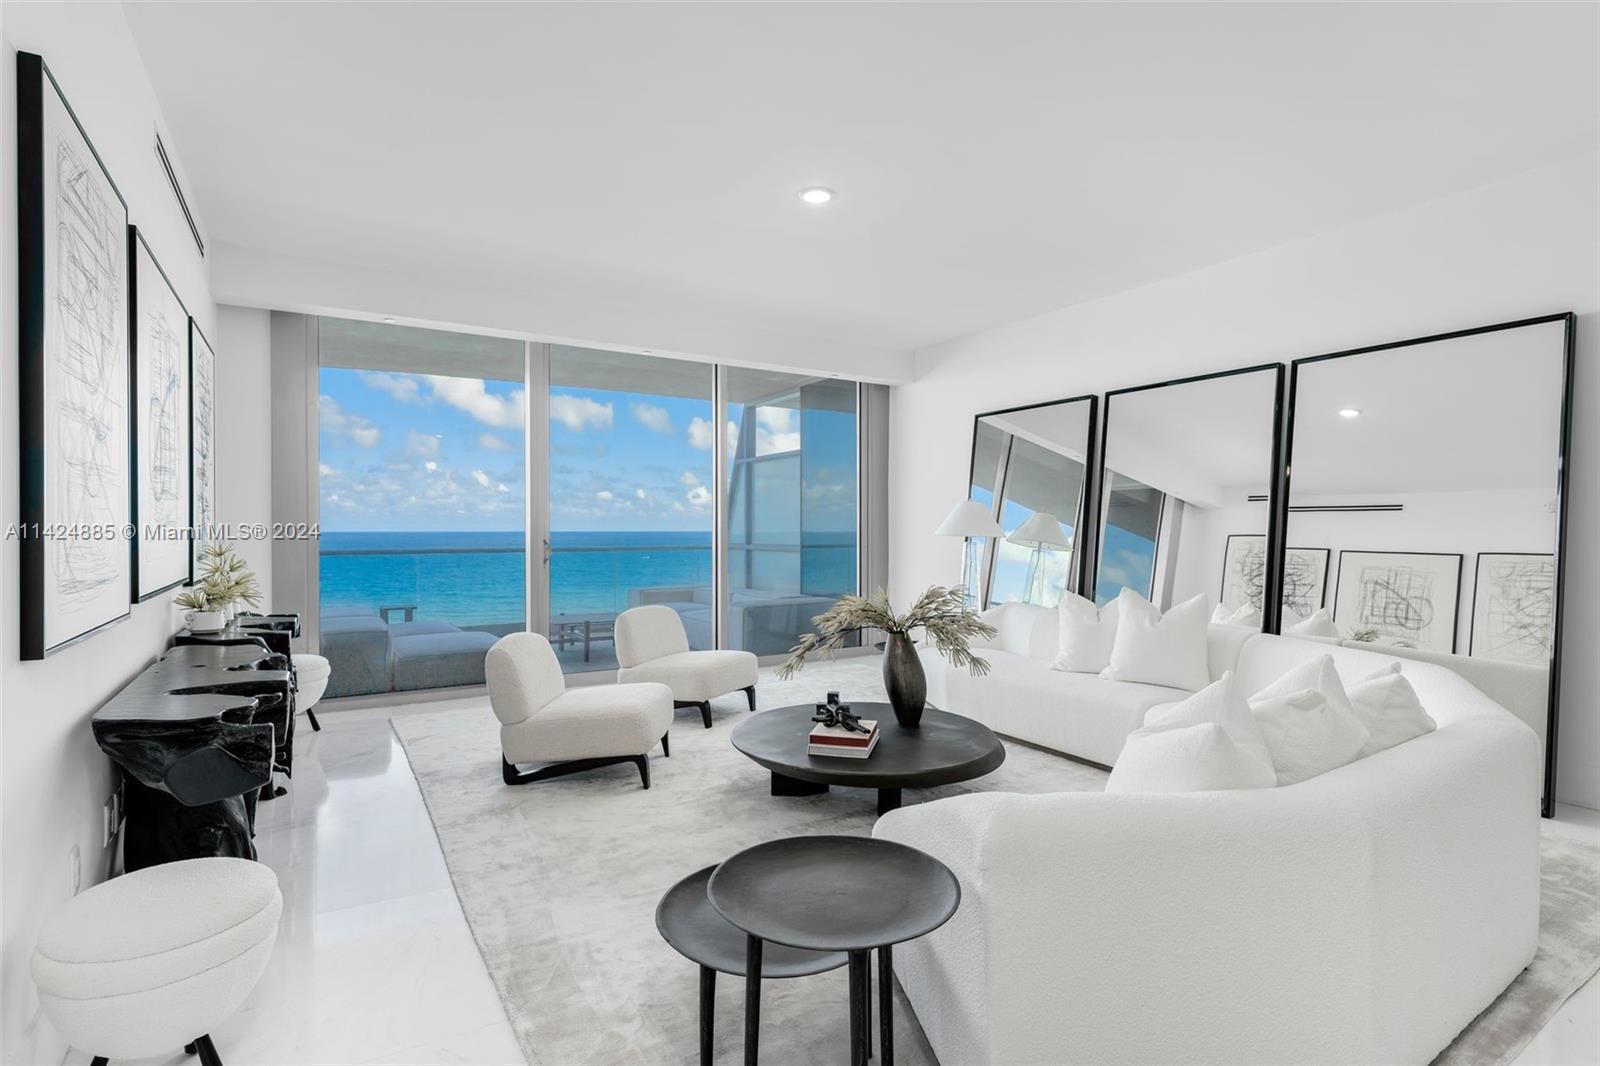 Fendi Chateau Residences Unit #1004 Condo for Sale in Surfside ...